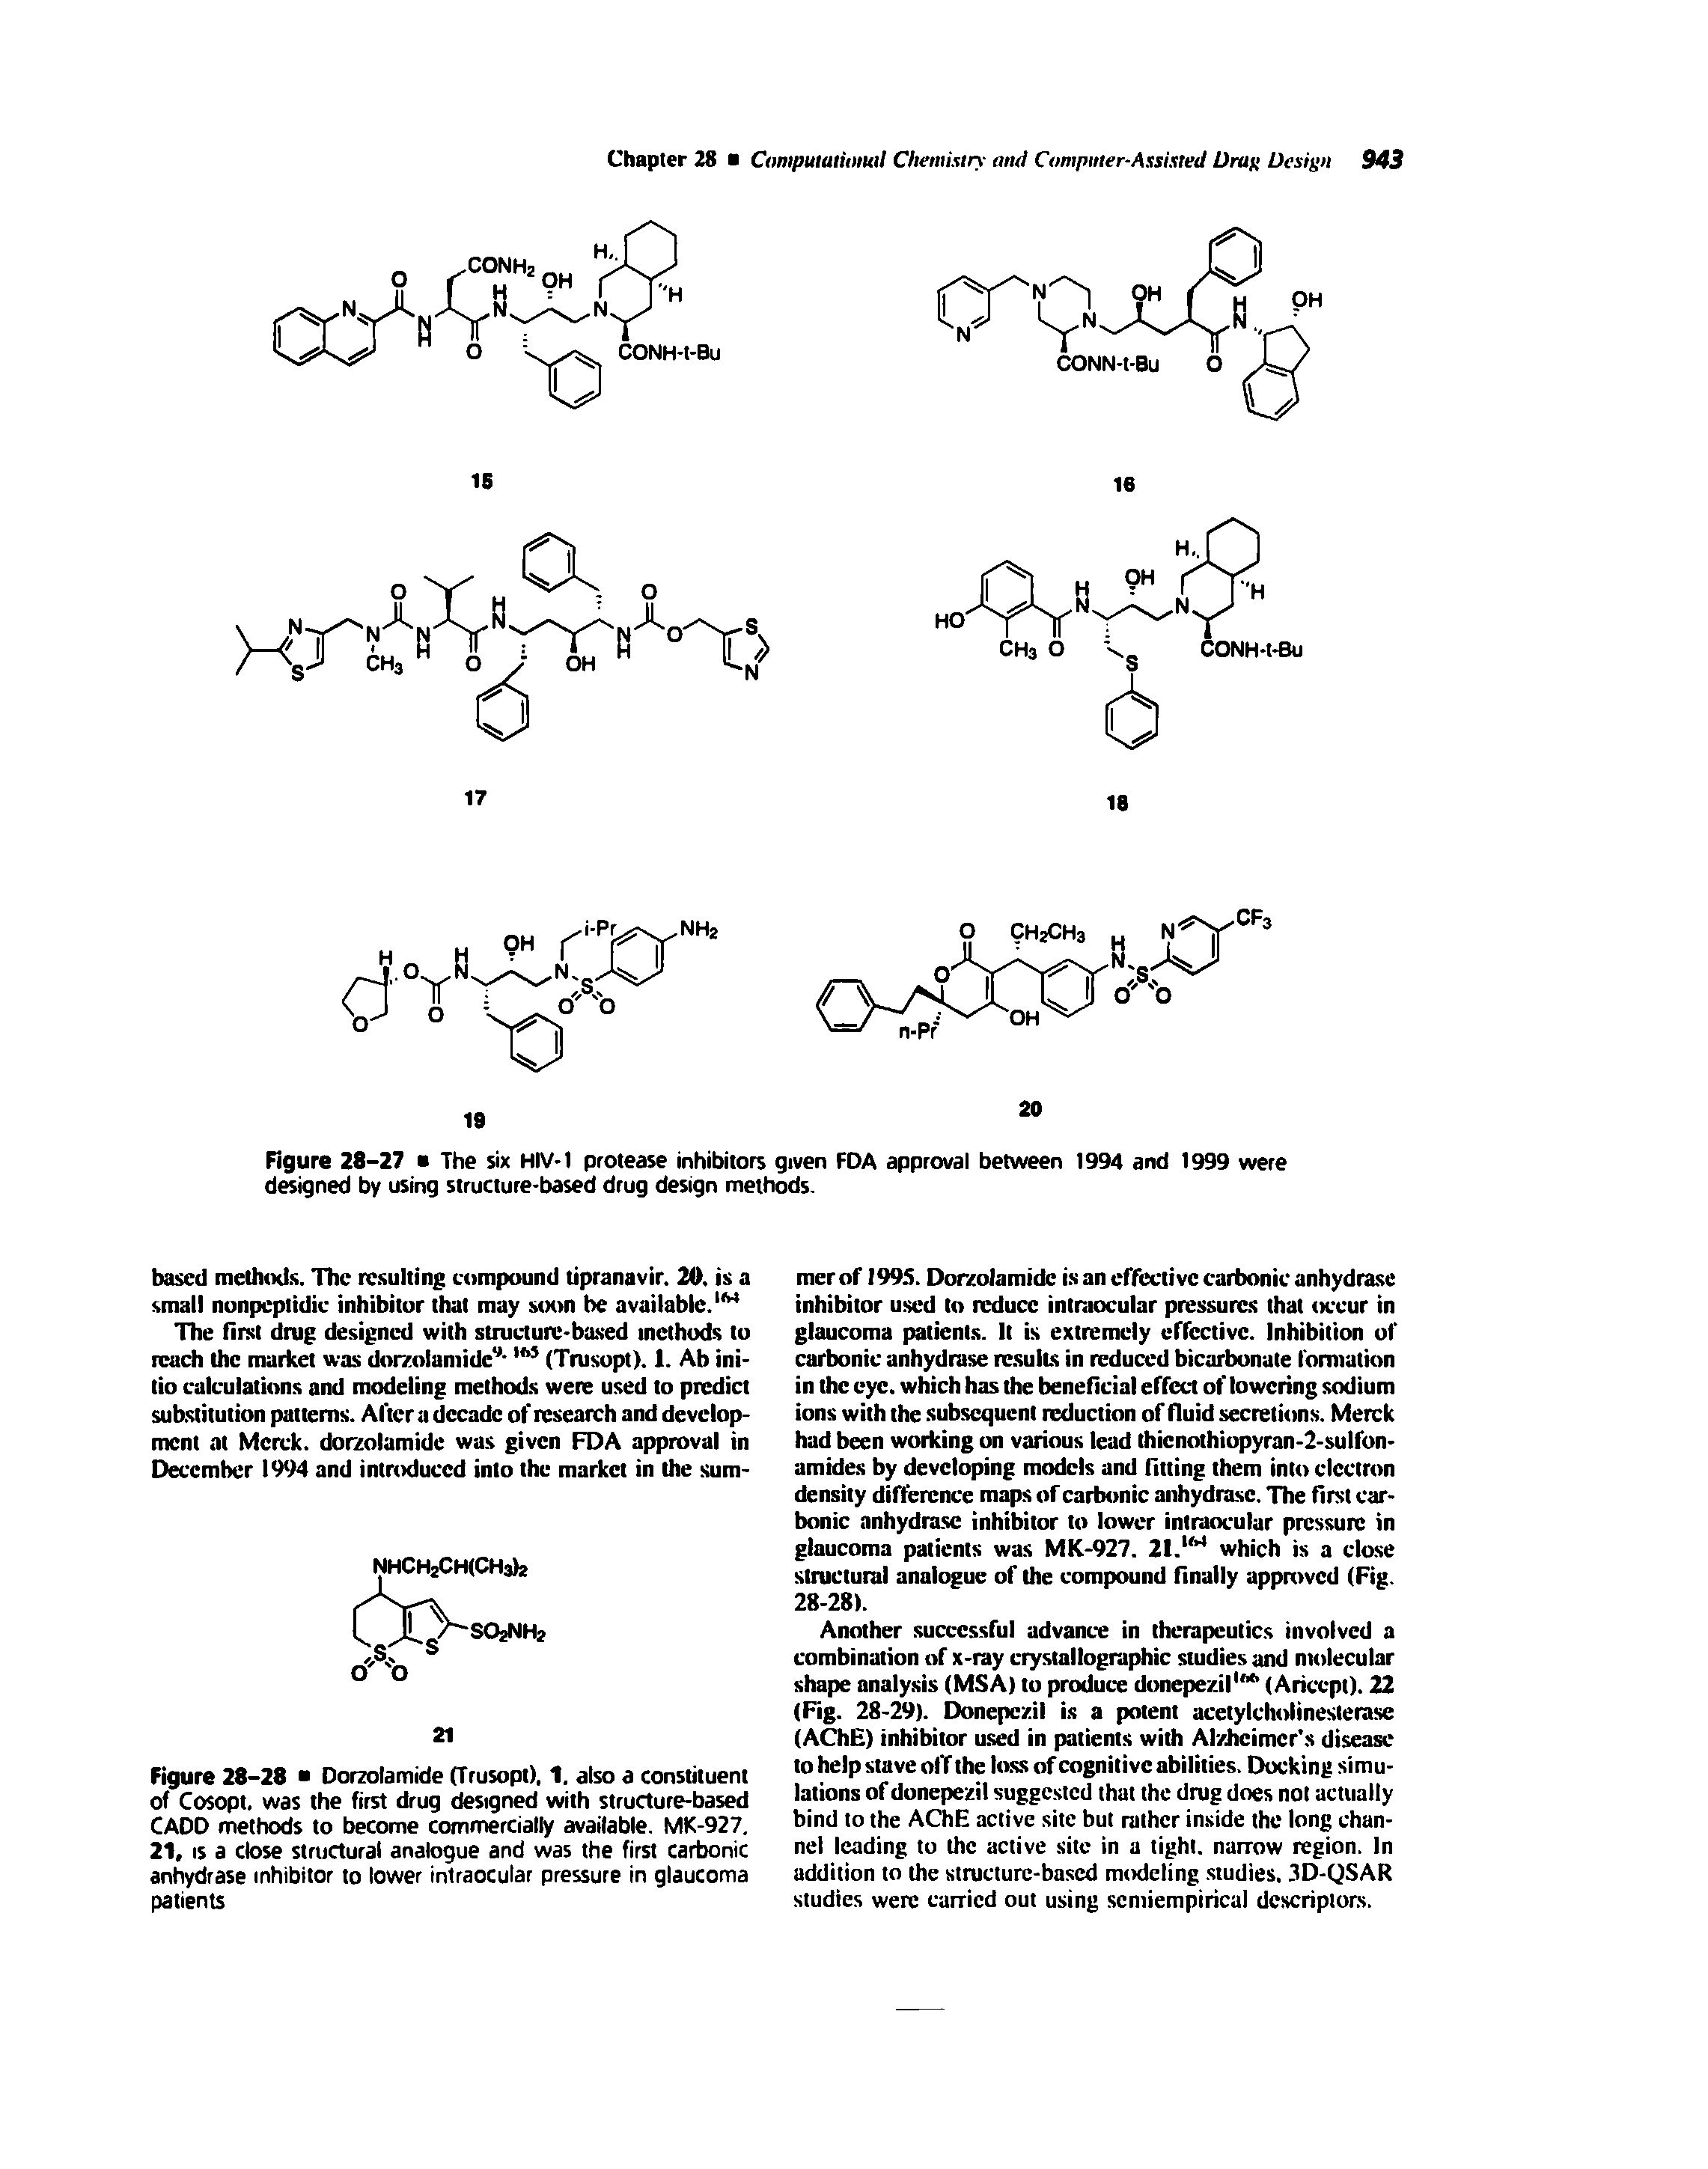 Figure 28-27 The six HIV-1 protease inhibitors given FOA approval between 1994 and 1999 were designed by using structure-based drug design methods.